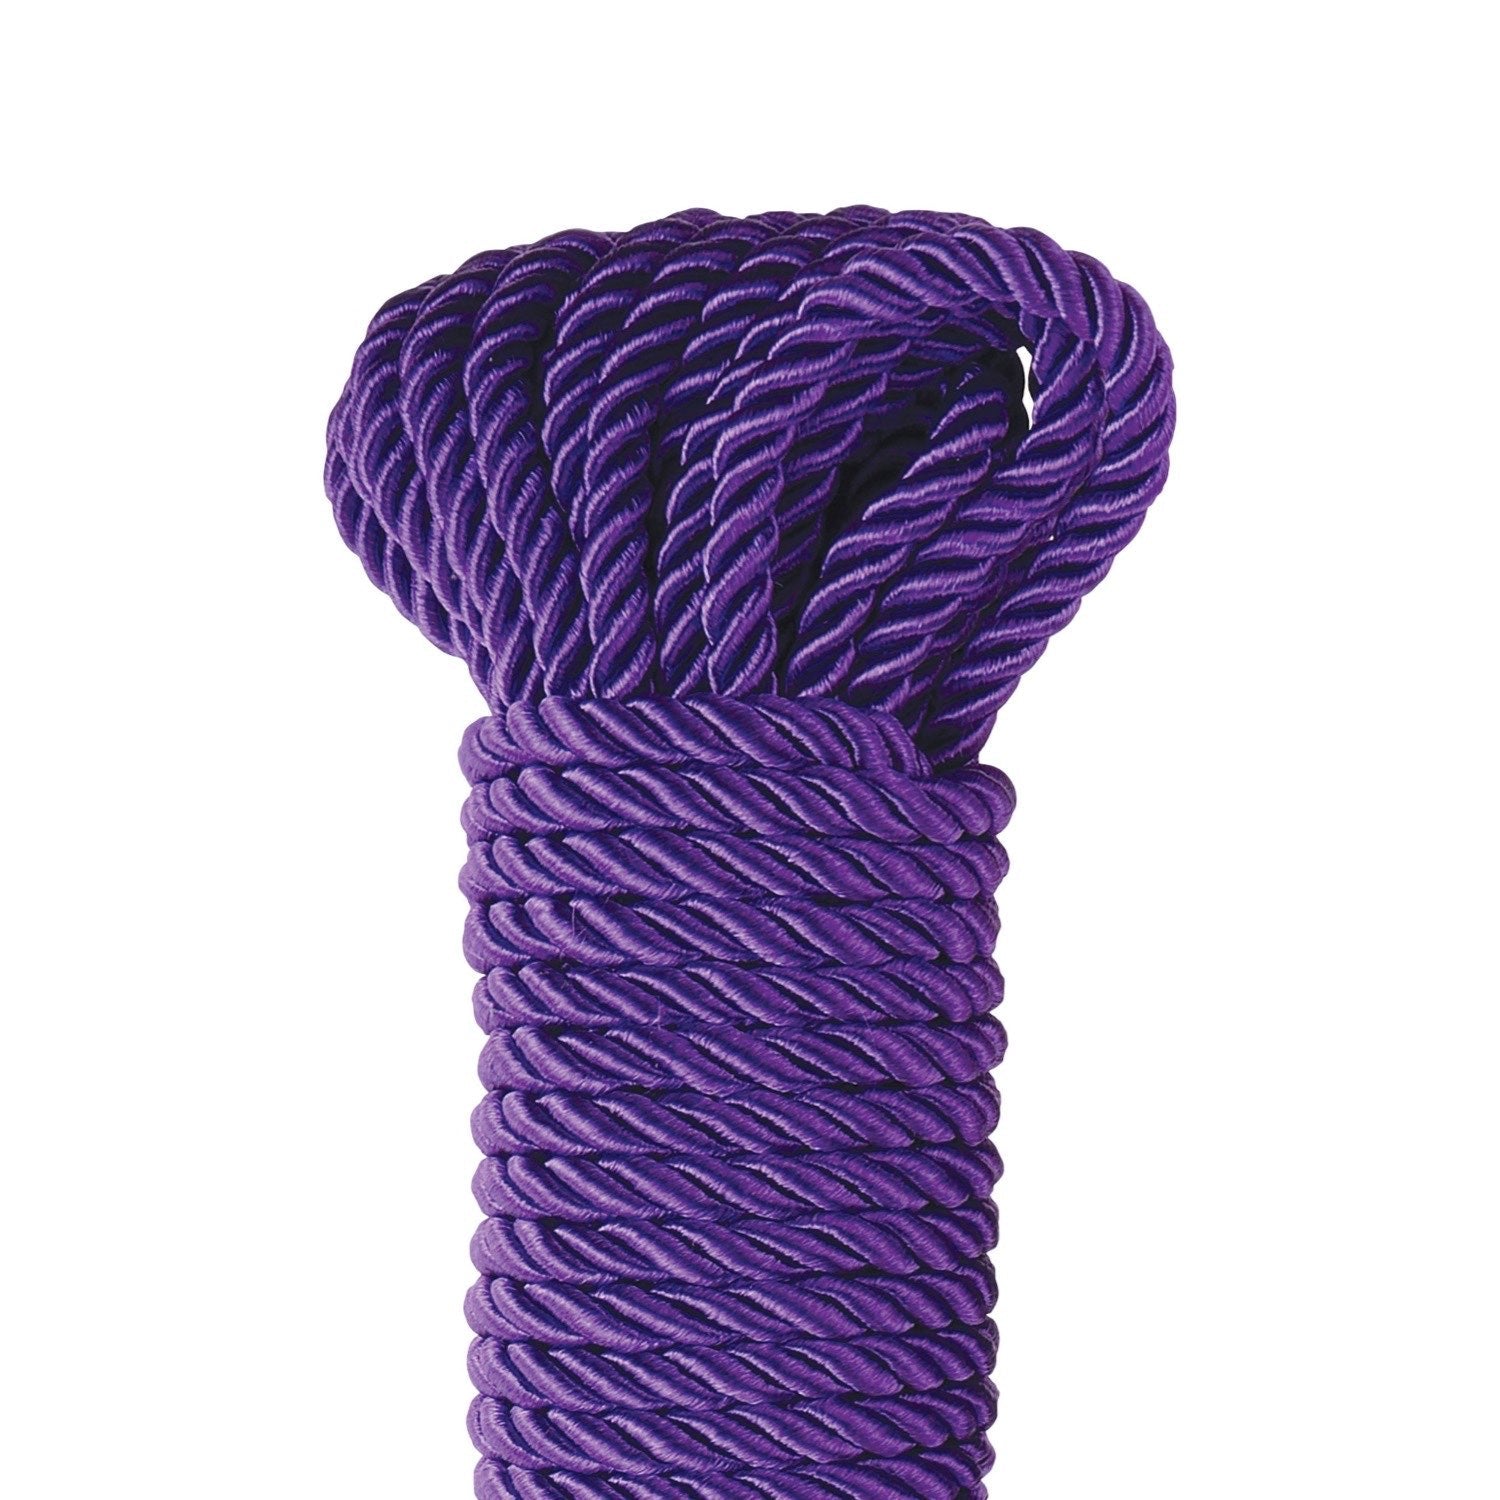 Fetish Fantasy Series Deluxe Silky Rope - Purple Bondage Rope - 9.75 m Length by Pipedream